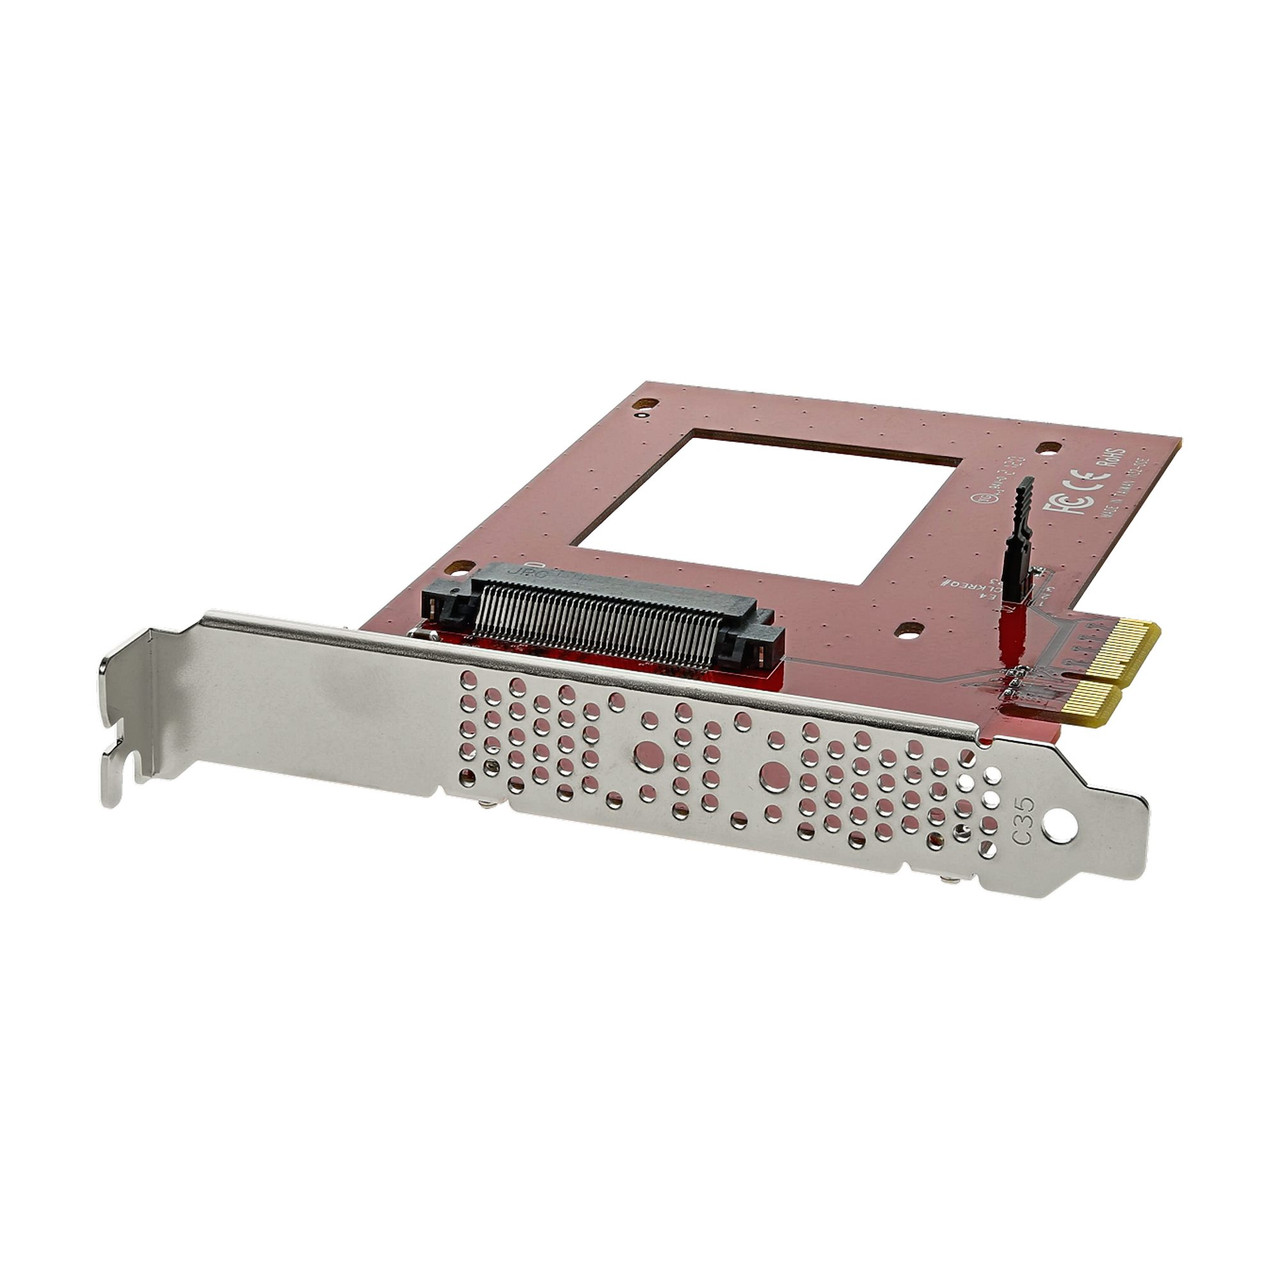 2.5 NVMe U.2 SSD and 2.5in SATA SAS Drive Mobile Rack For